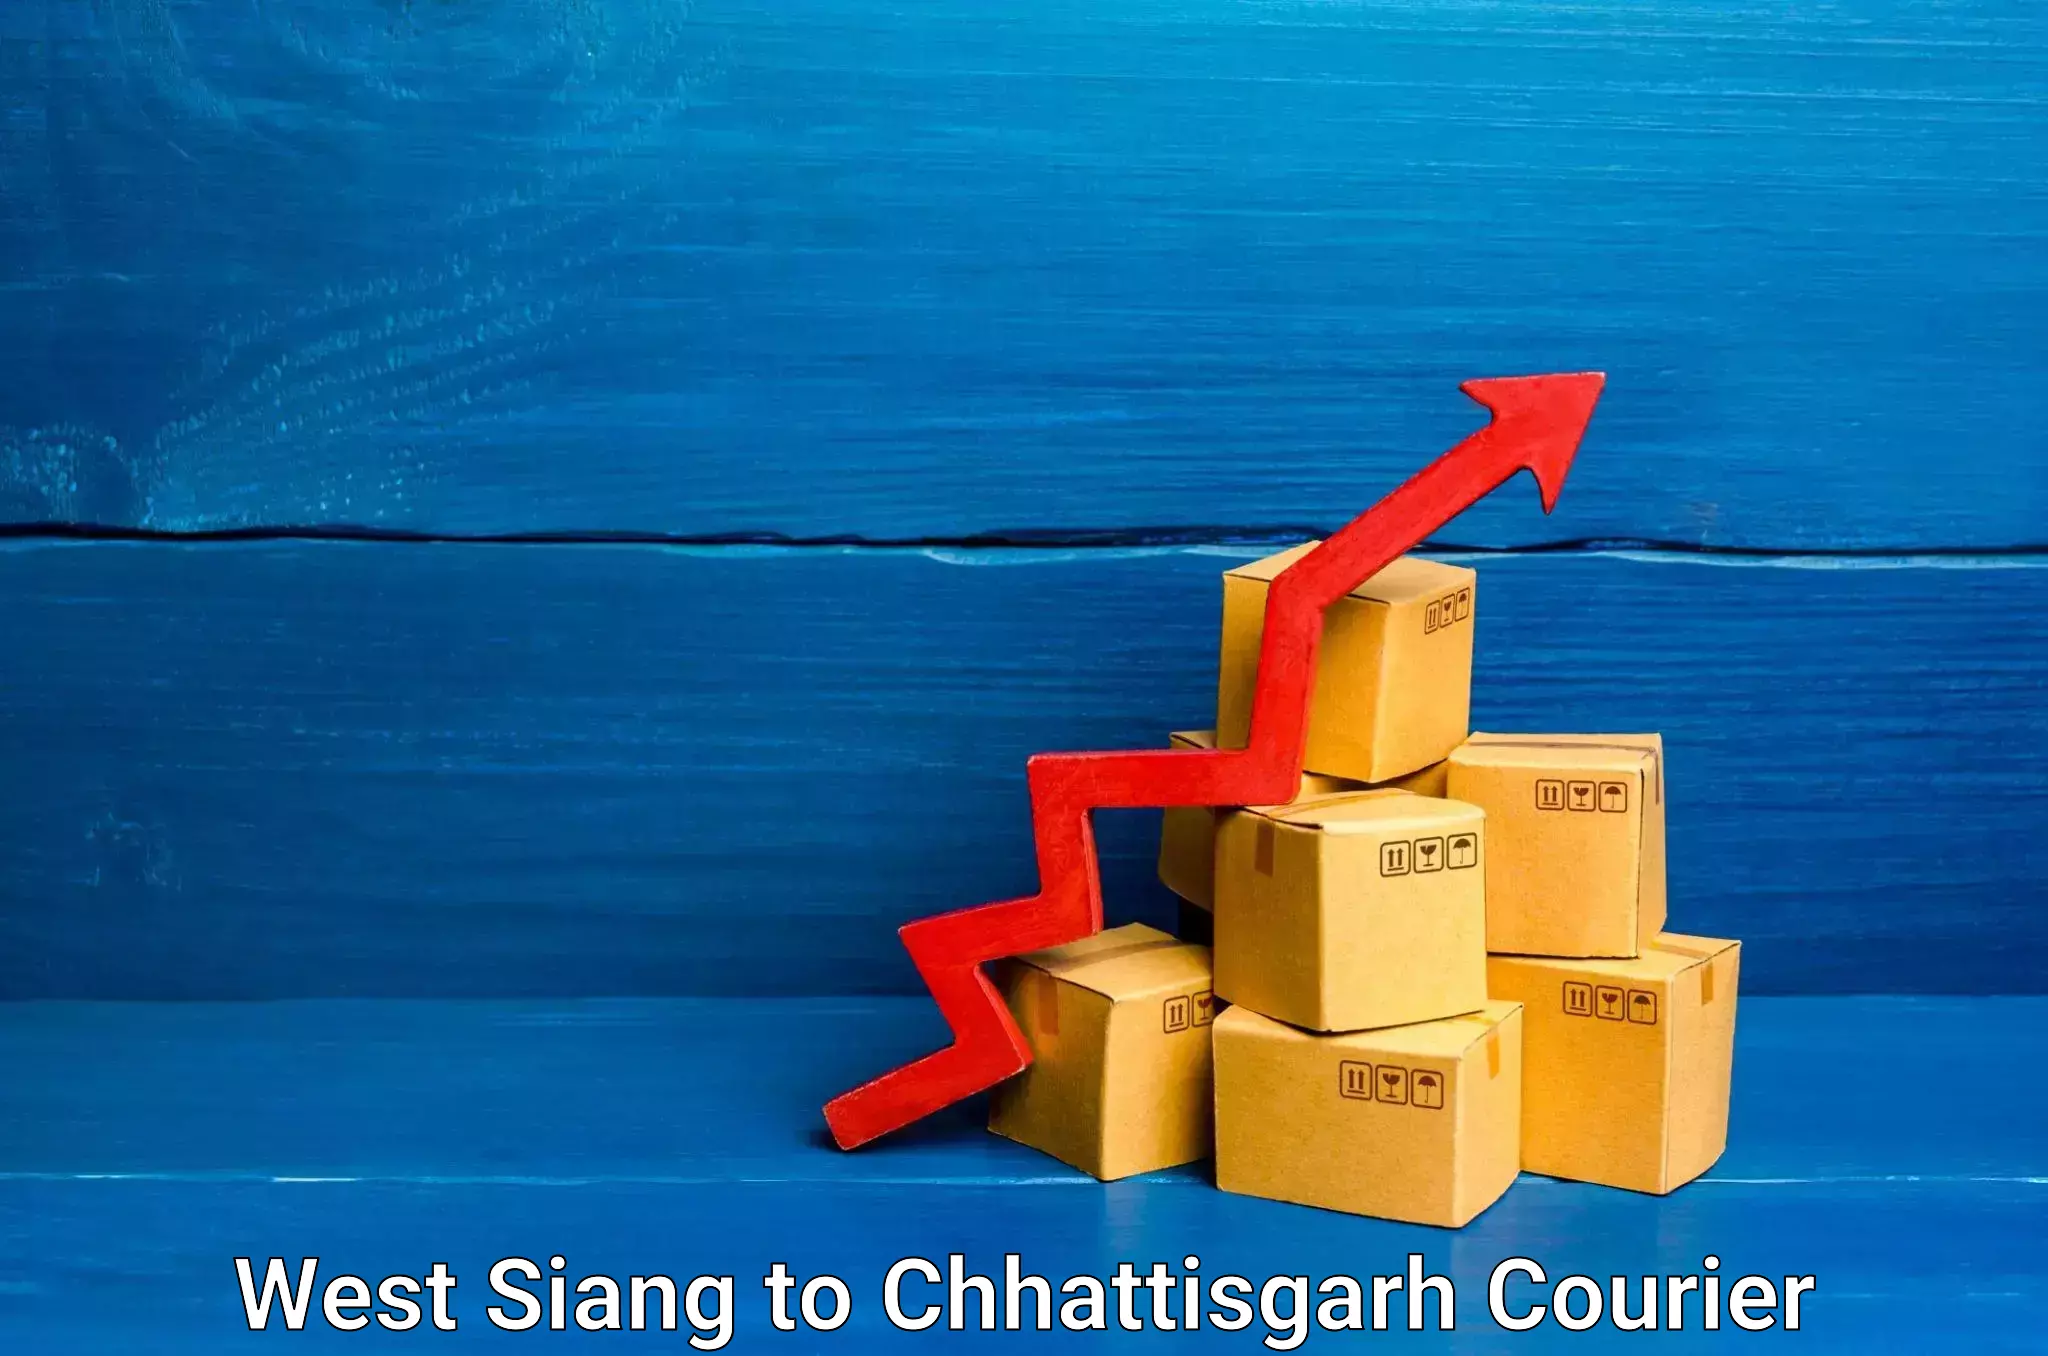 Courier insurance West Siang to Chhattisgarh